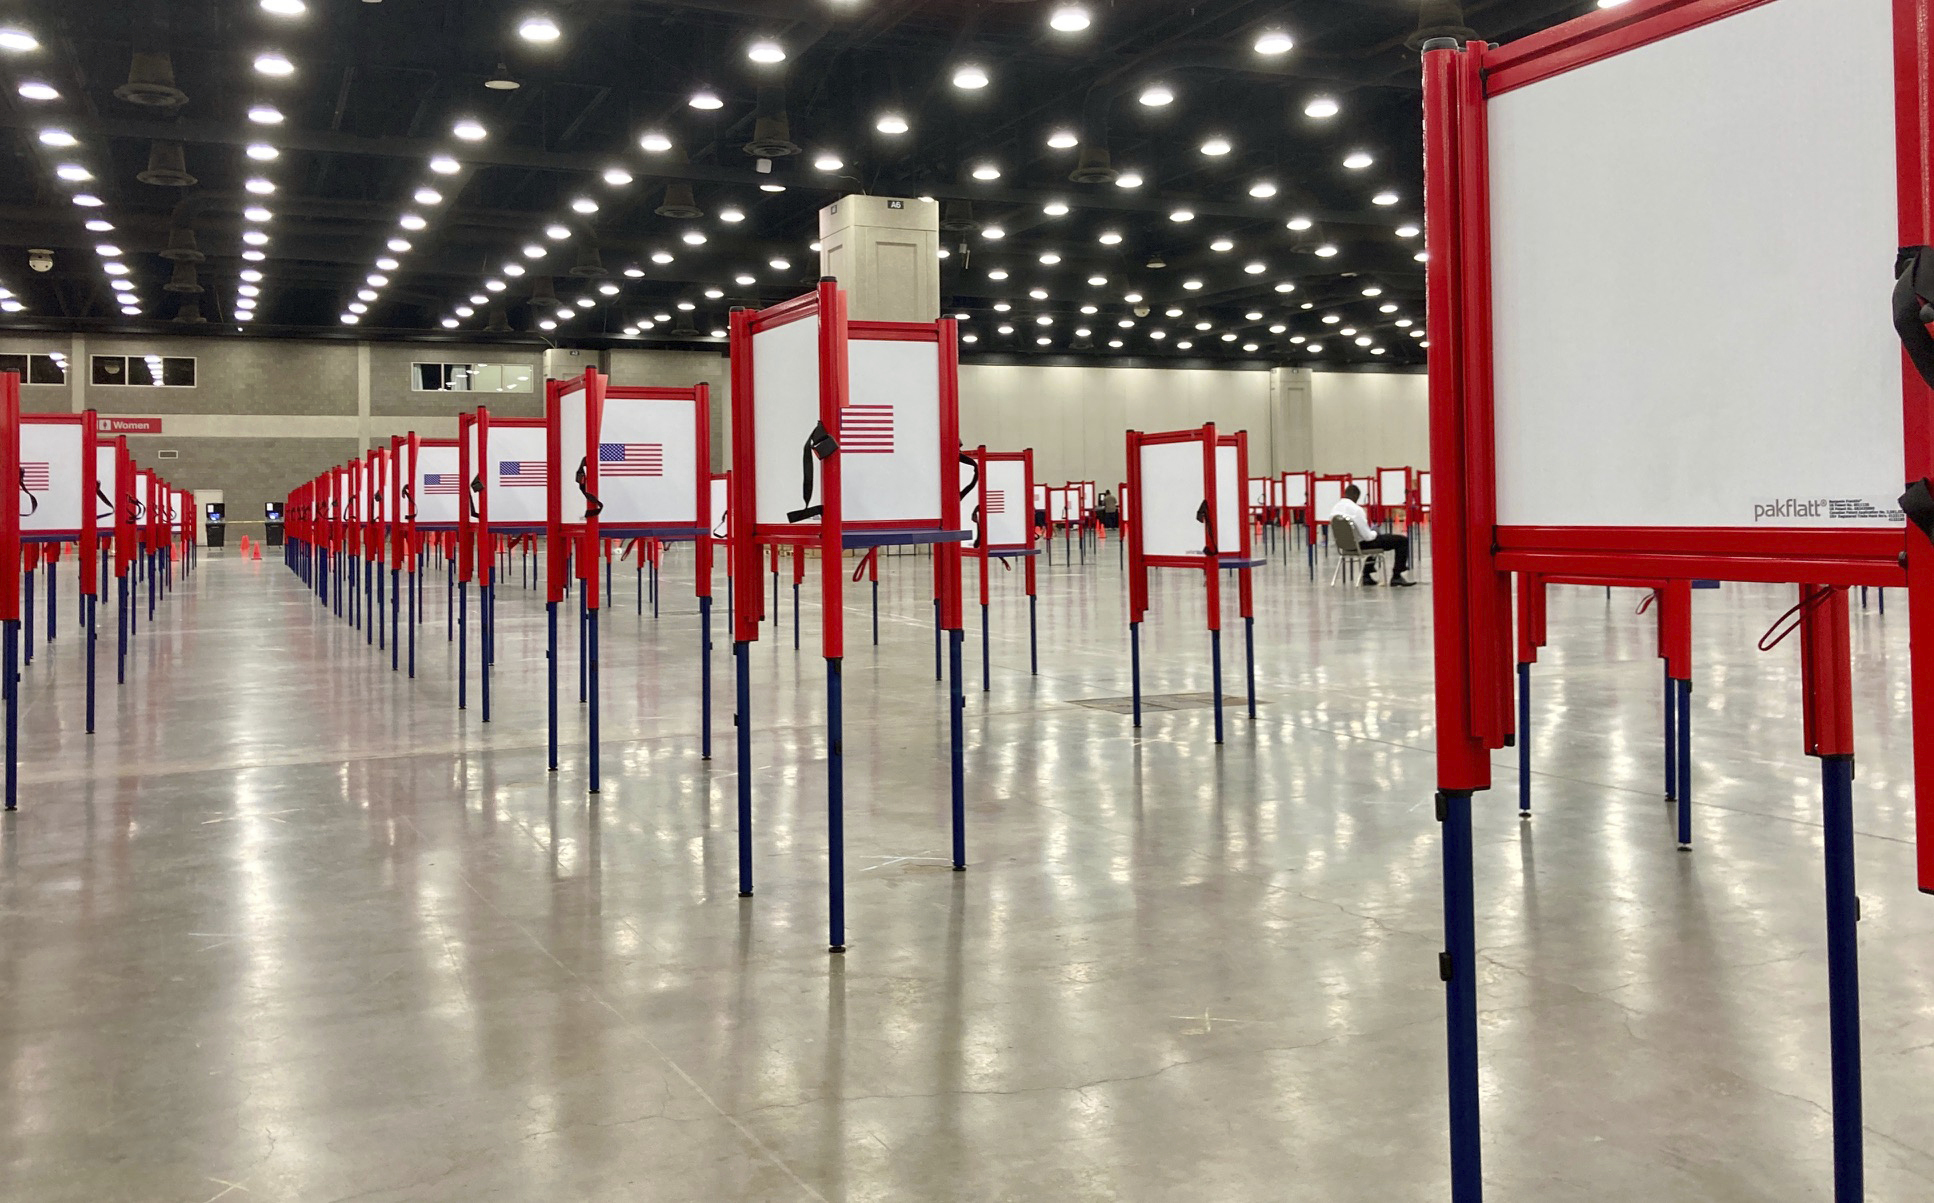 PHOTO: Voting stations are set up for the primary election at the Kentucky Exposition Center, June 22, 2020, in Louisville, Ky.